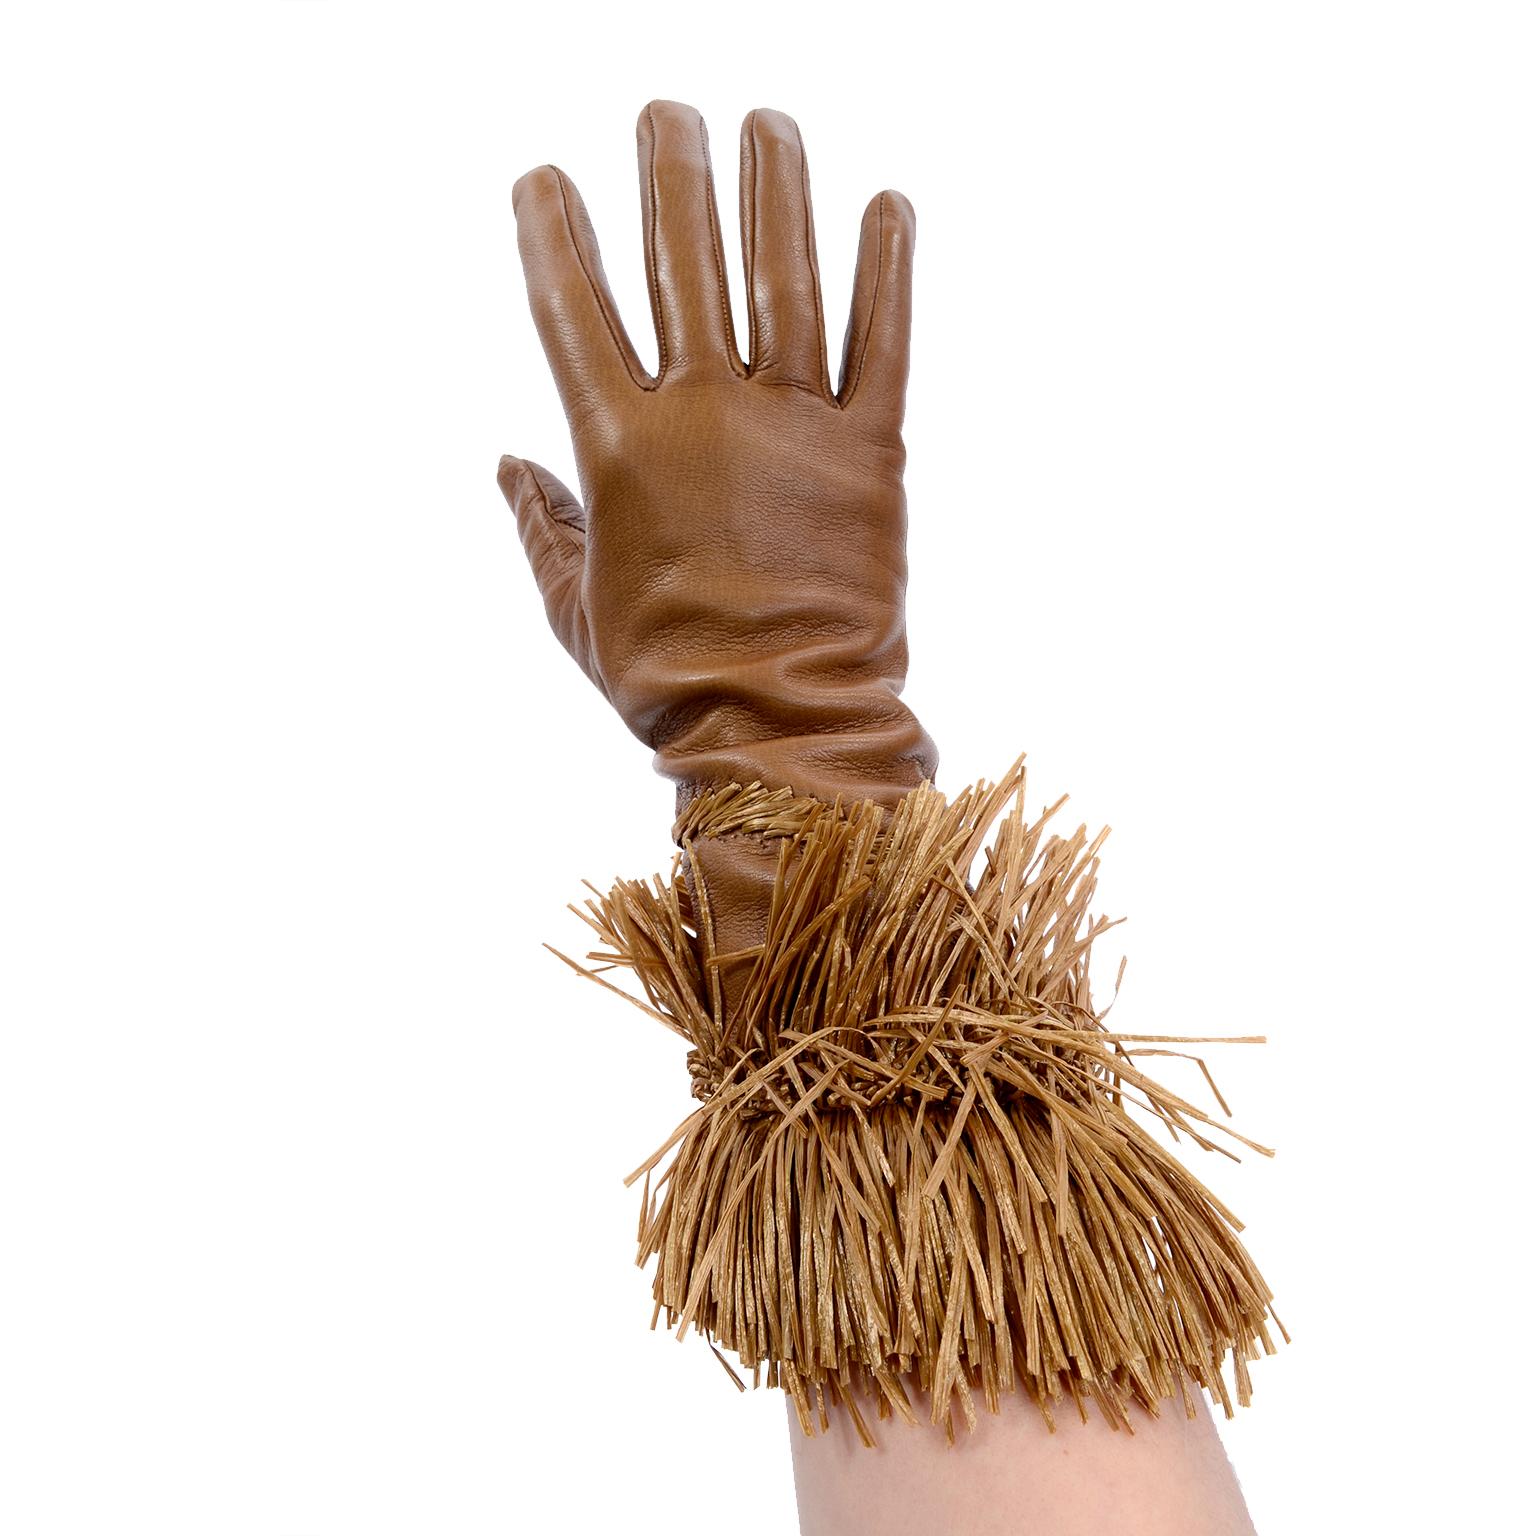 From our favorite blouse designer, Gianfranco Ferre is also a master of accessories!  We have always loved his gloves and this particular pair is exceptional!  These vintage buttery soft tan leather gloves have braided straw on the top of the left